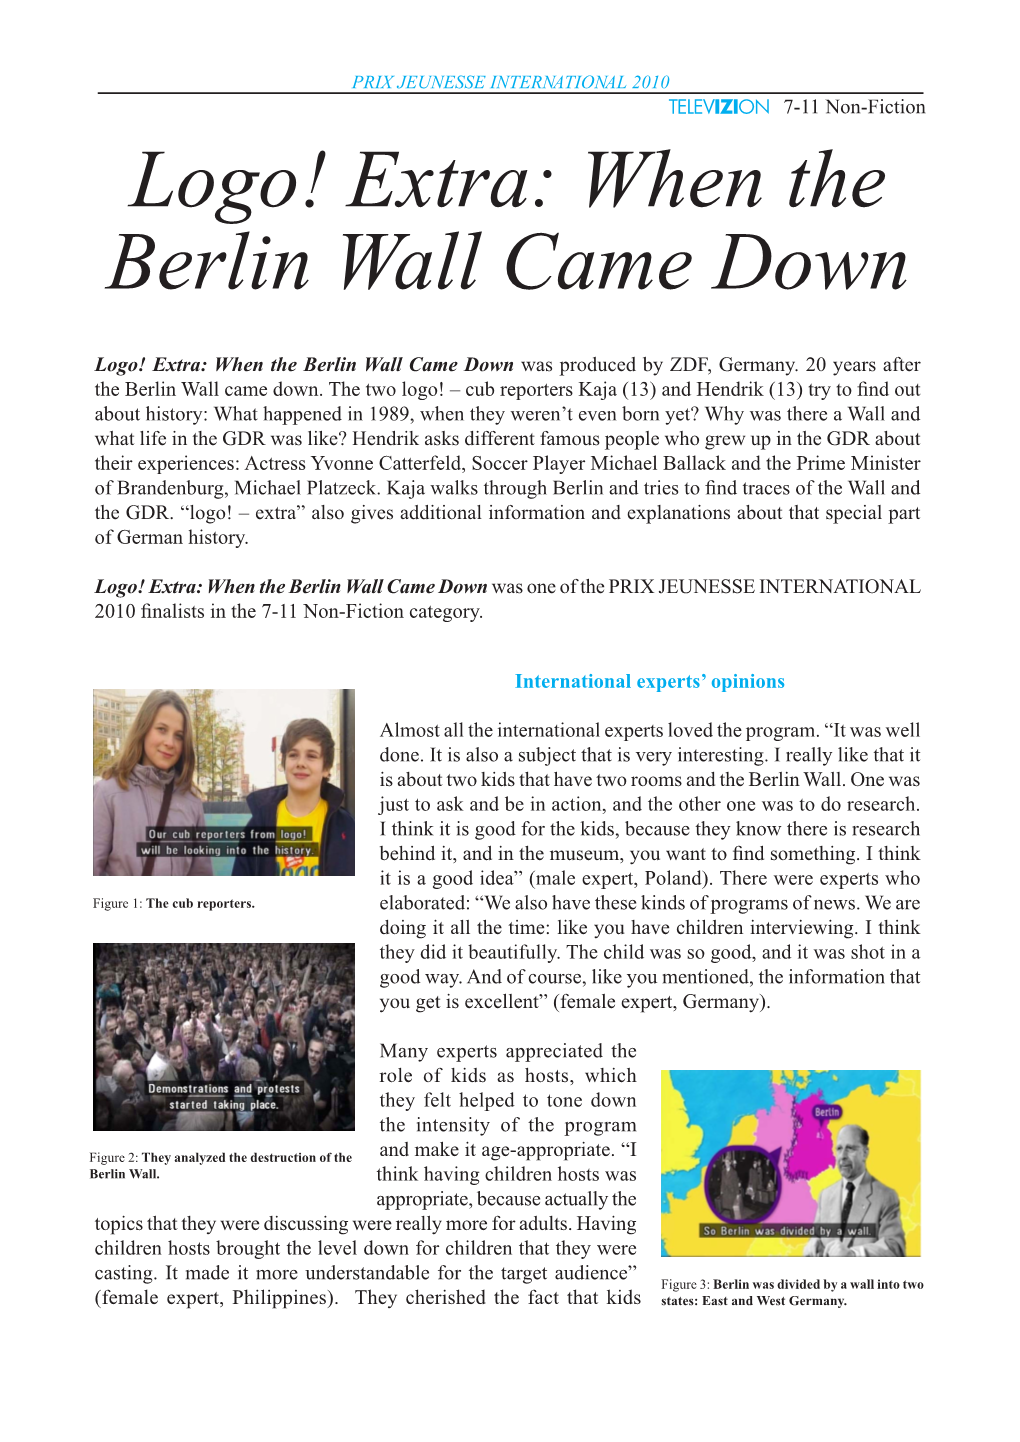 Logo! Extra: When the Berlin Wall Came Down